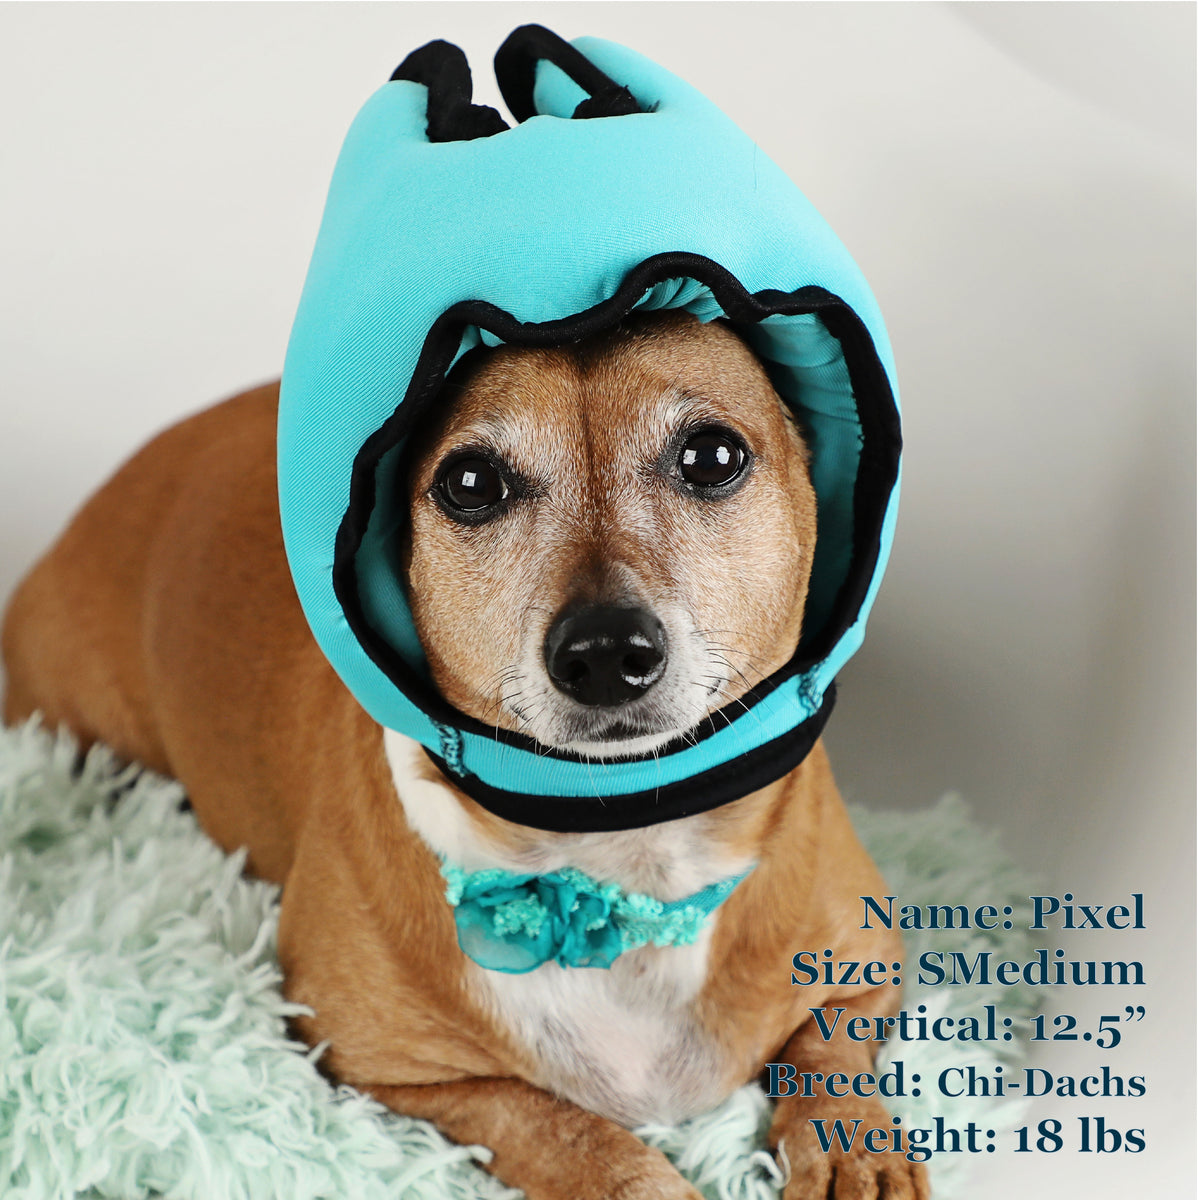 Pixel is a ChiWeenie in a SMedium Blue PAWNIX Noise Cancelling Headset for dogs